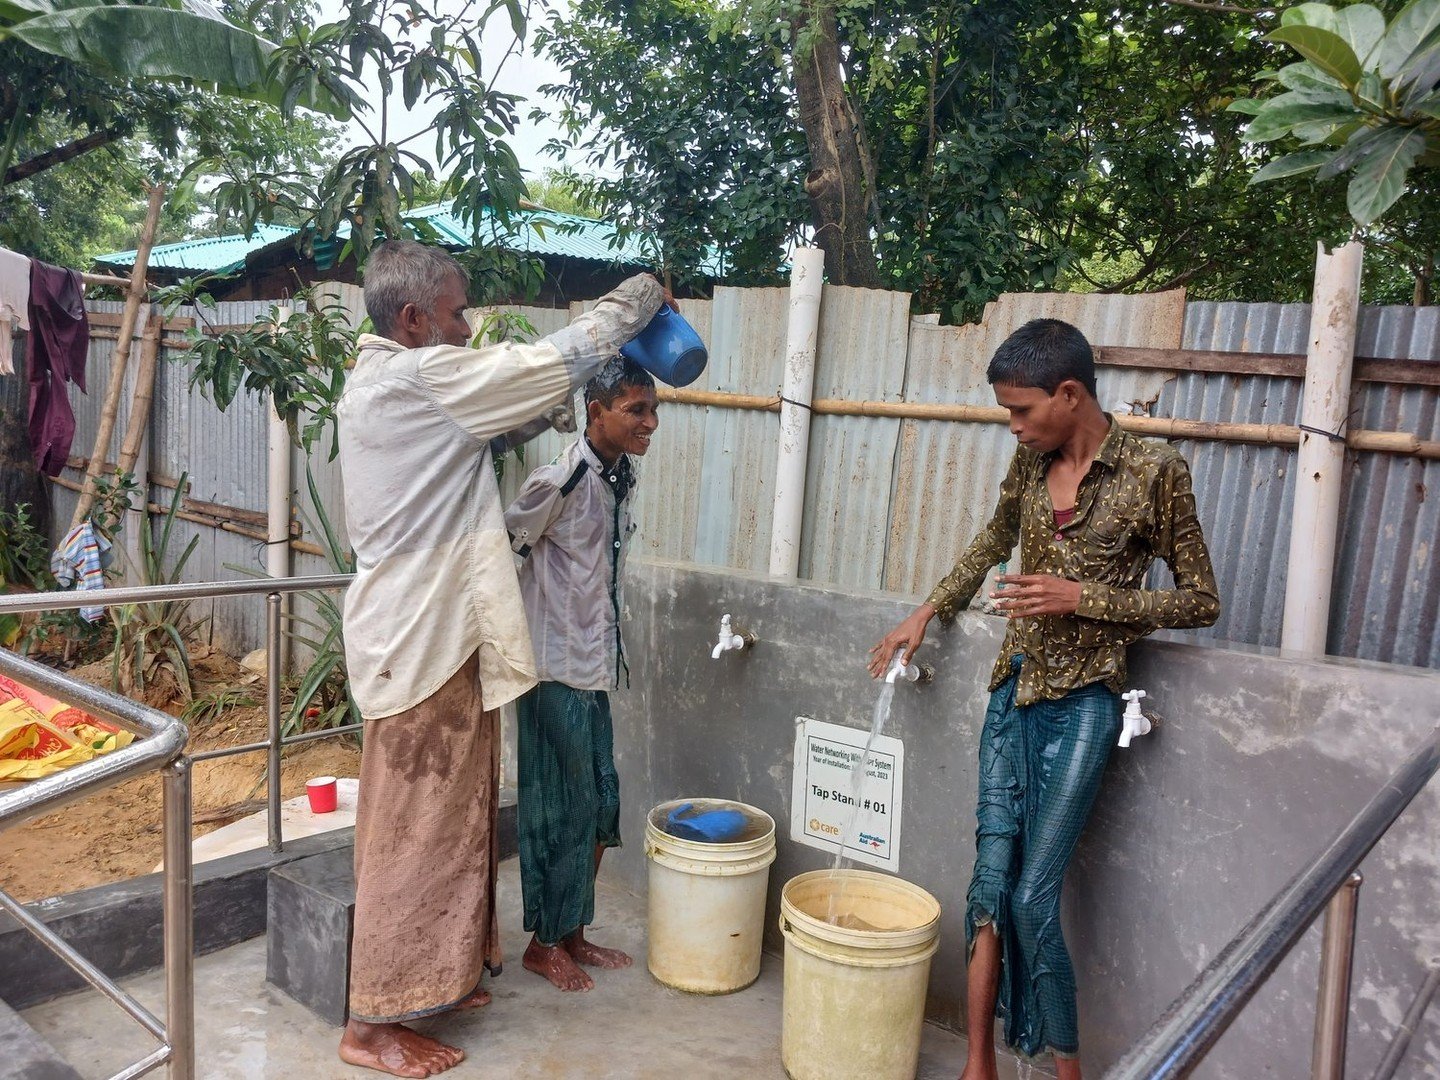 Having a tap close to, or inside, your home is something that many people around the world take for granted. But for one family living in Cox's Bazar, Bangladesh, a new tap has been life-changing. 

After support from CARE Bangladesh, though the Aust